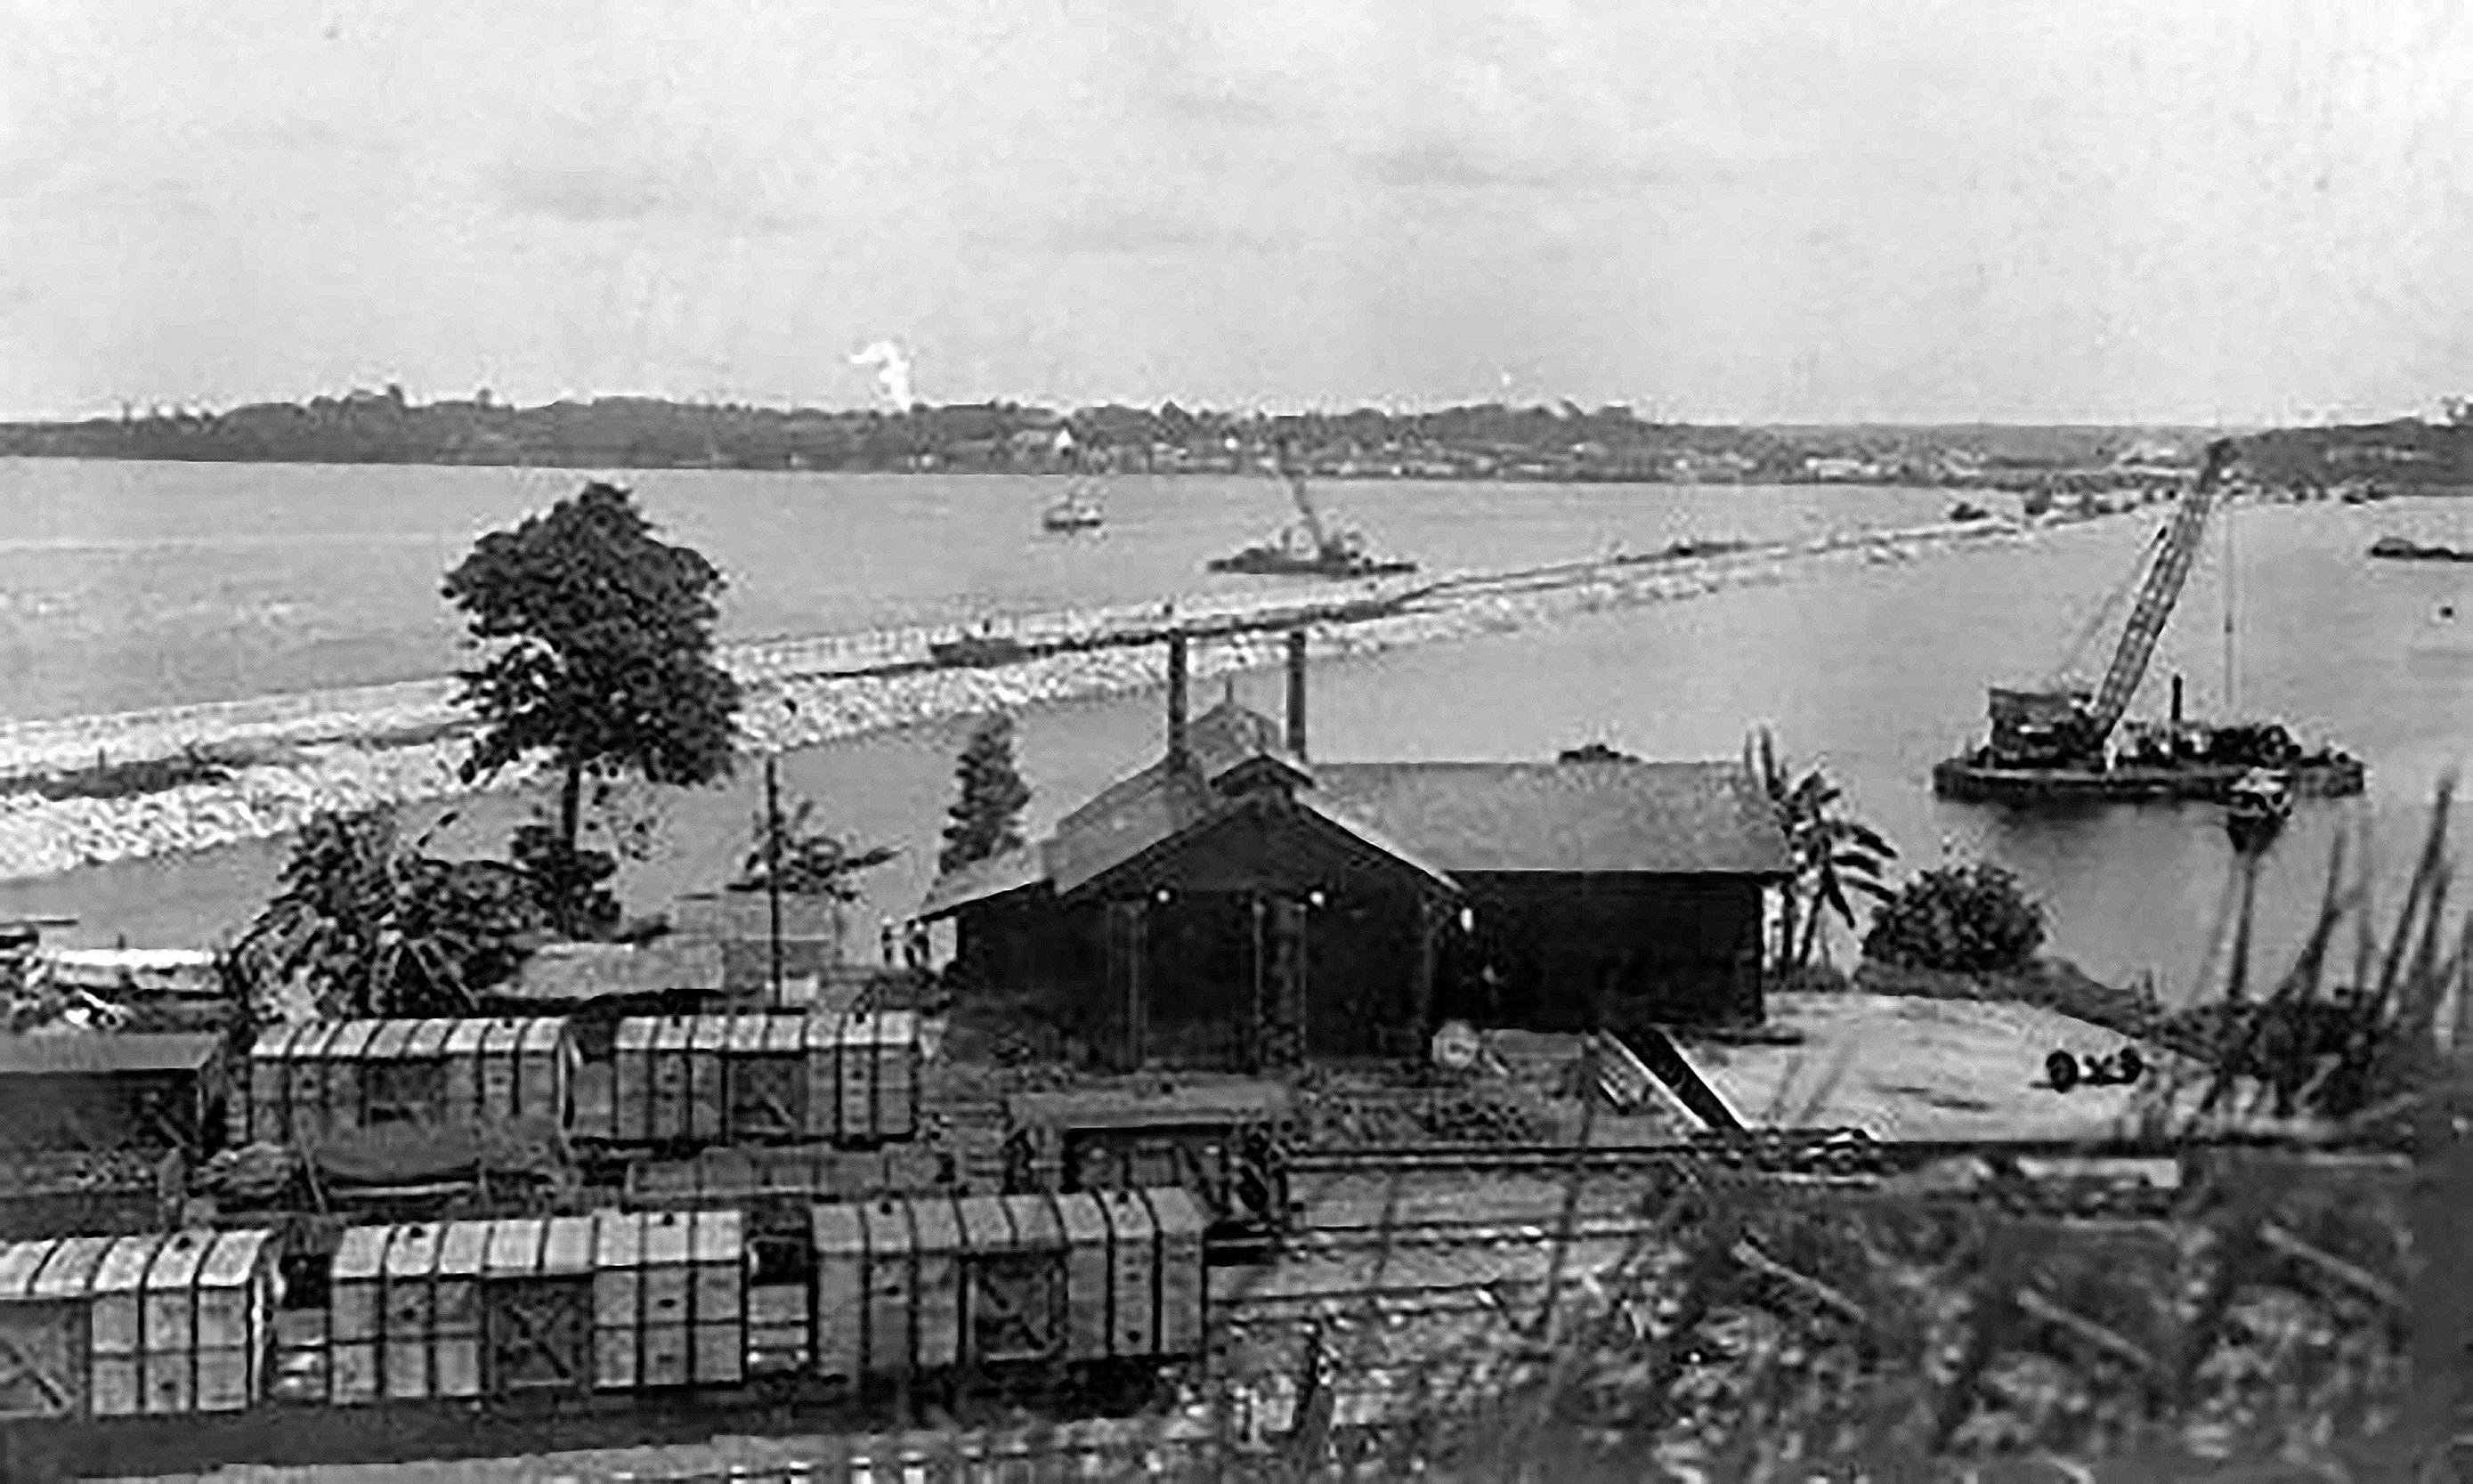 The Johor-Singapore causeway is seen under construction in the early 1920s. Photo: Handout